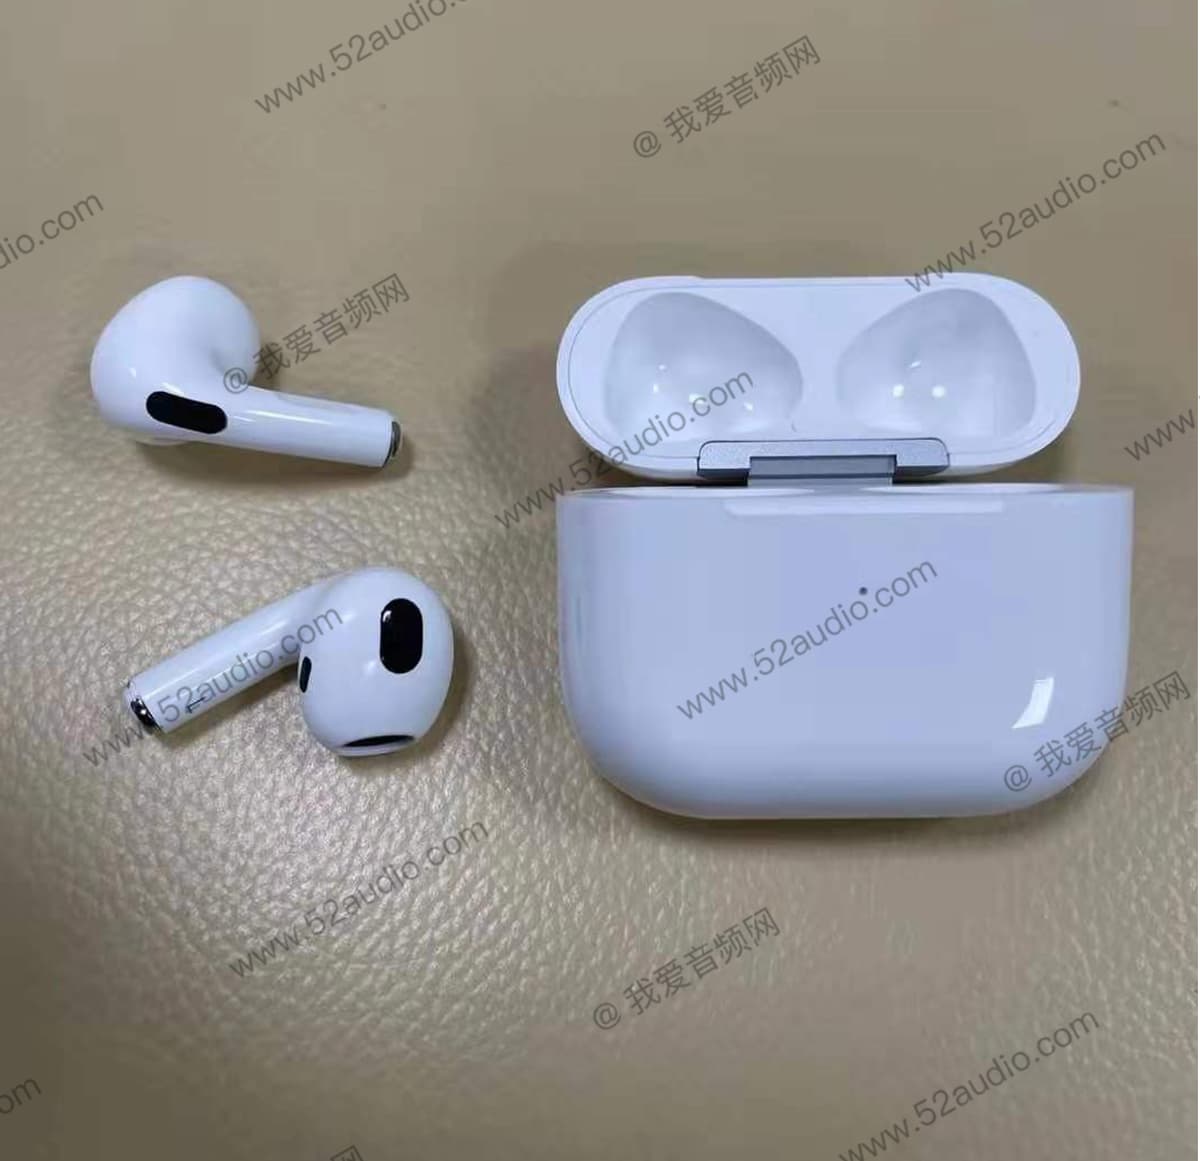 AirPods 3 實體諜照曝光，外型、規格與售價總整理1